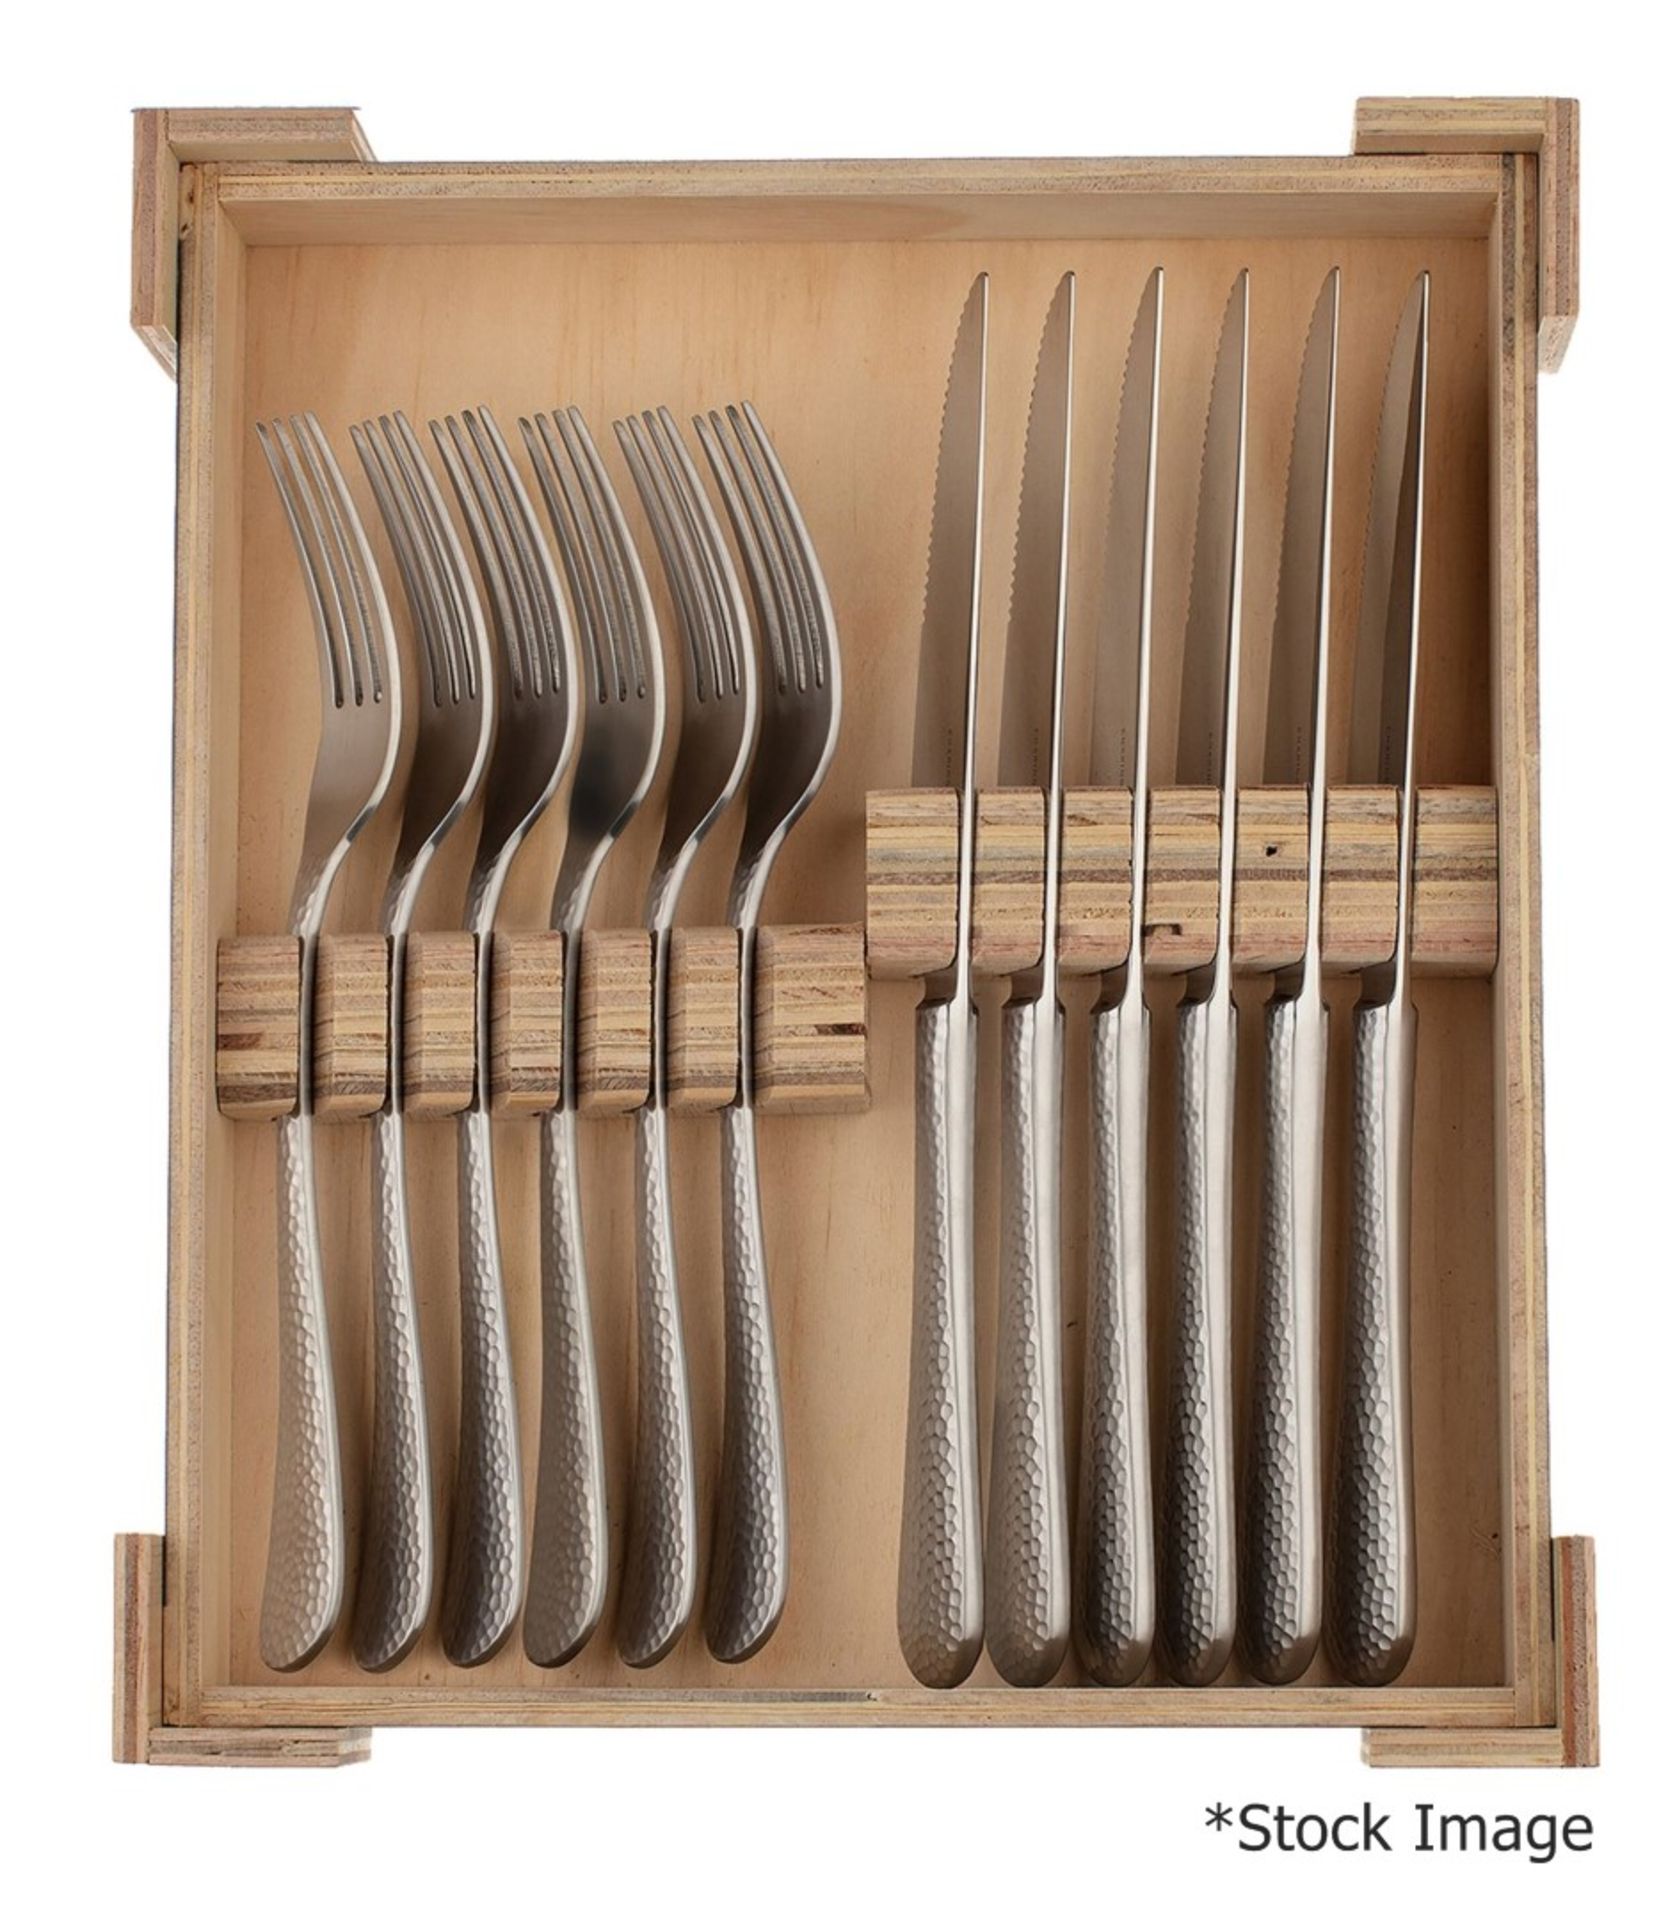 1 x CHARINGWORTH 'Planish' Stainless Steel 12-Piece Steak Knives and Forks Set - Original Price £ - Image 2 of 6